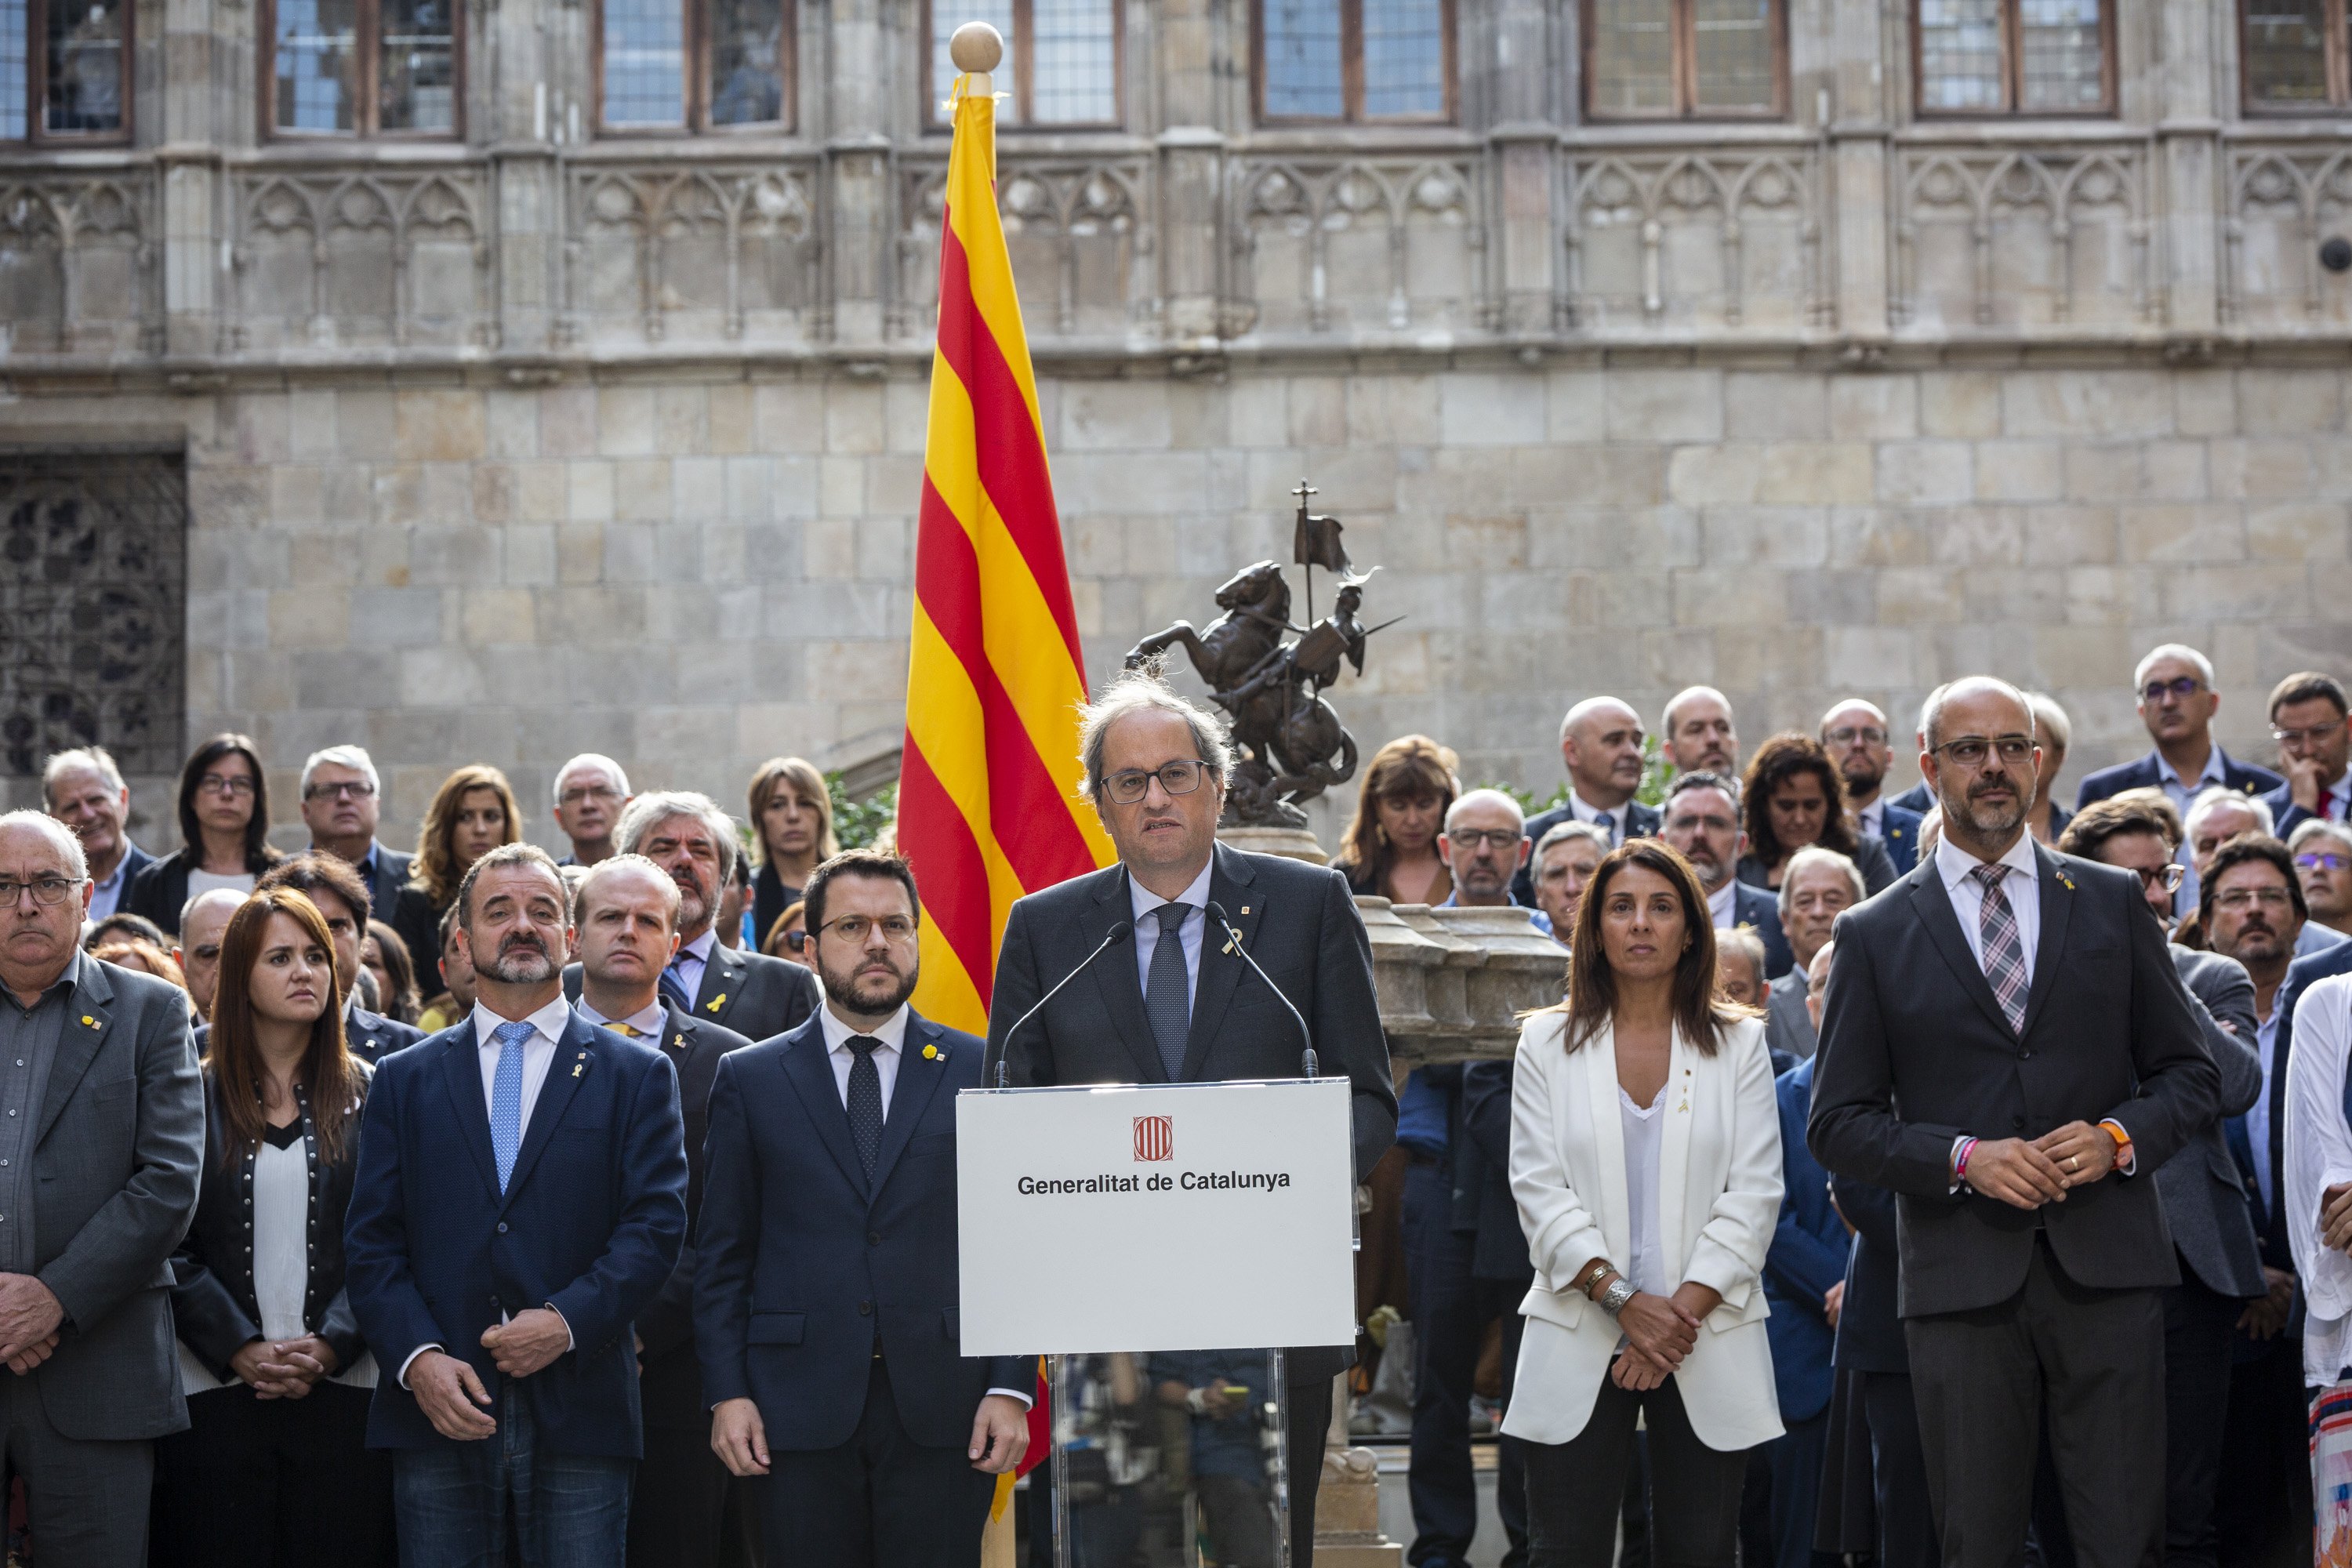 Catalan government commits to "advancing without excuses" towards the republic